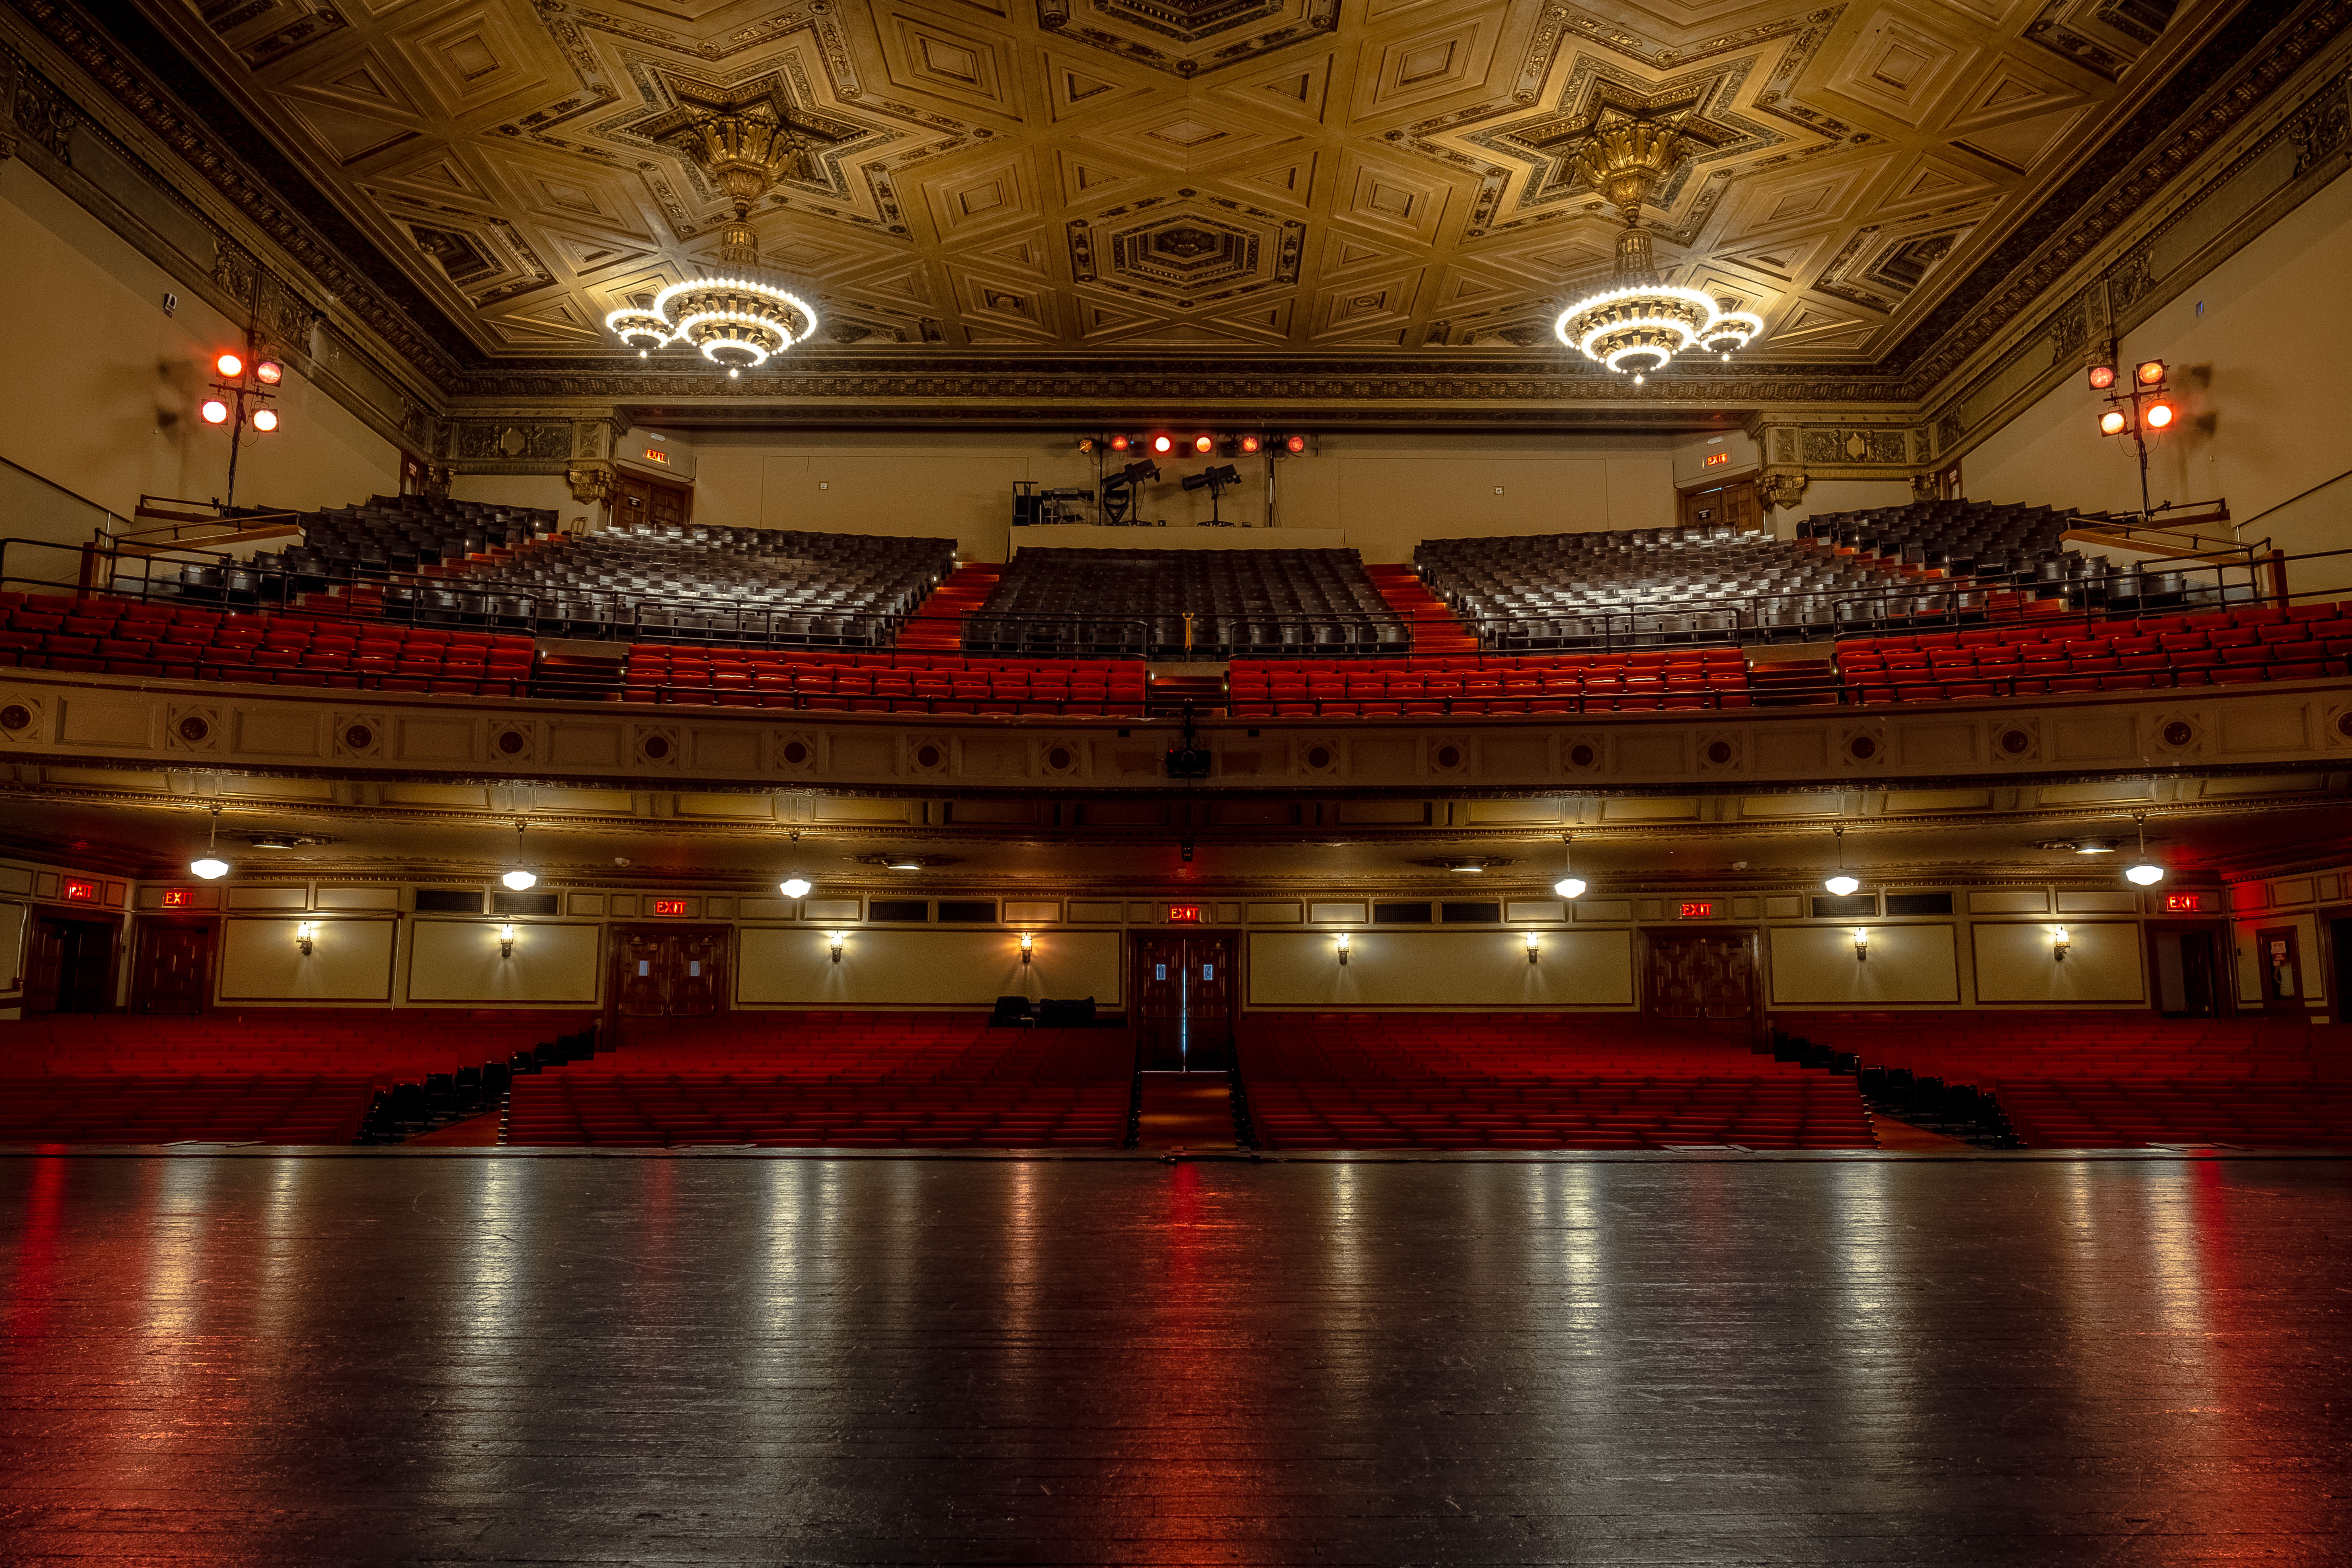 Sydney Goldstein Theater, San Francisco, California. View from the stage. photo by J Blackman, 2019